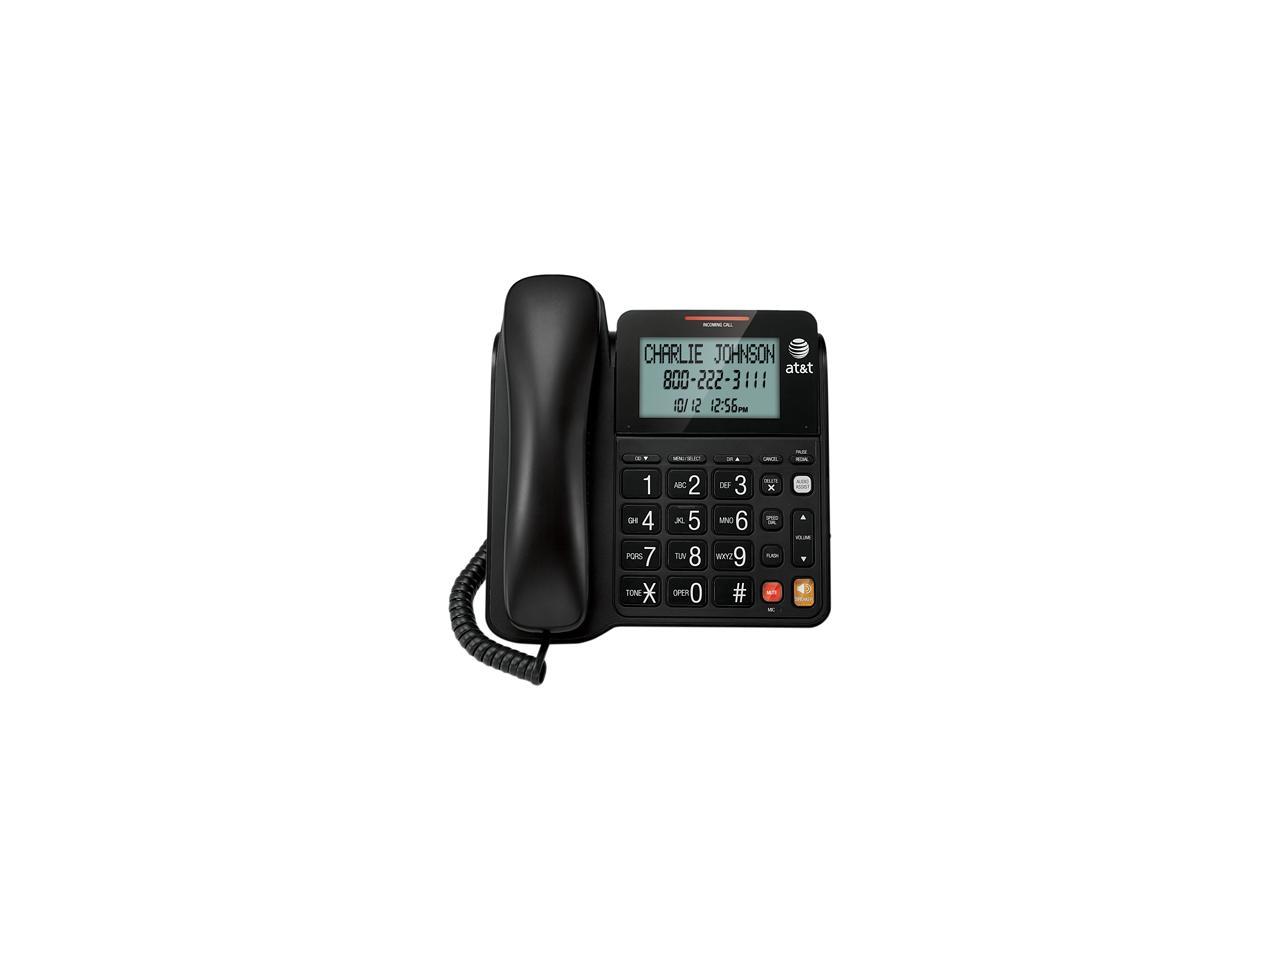 AT&T CL2940 Corded Phone - Newegg.com